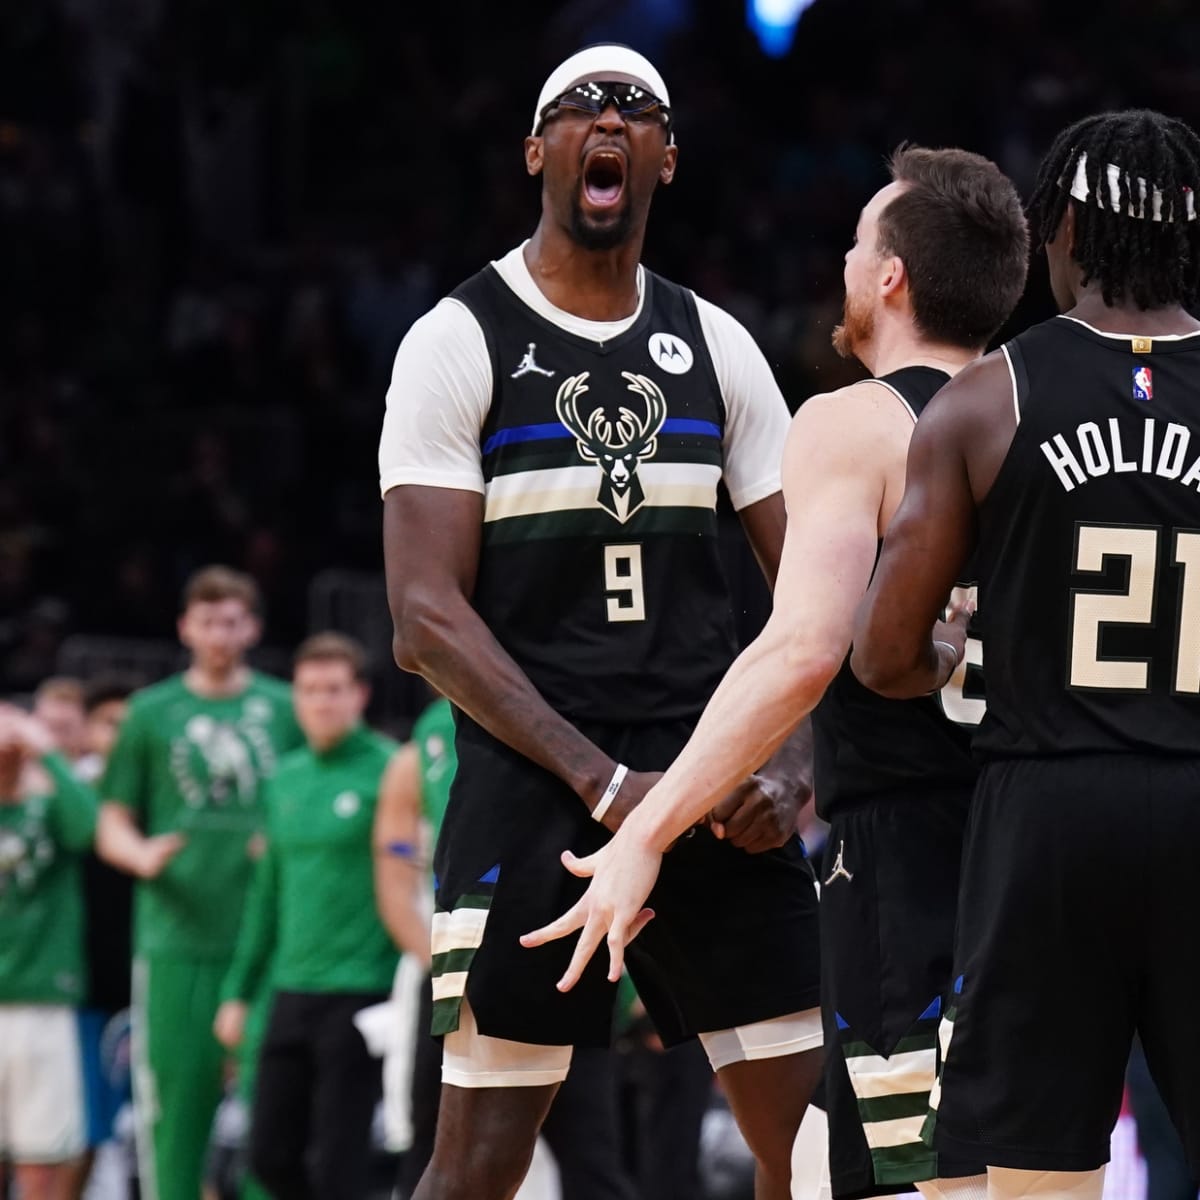 Bobby Portis shines for Bucks as Giannis' Game 5 replacement